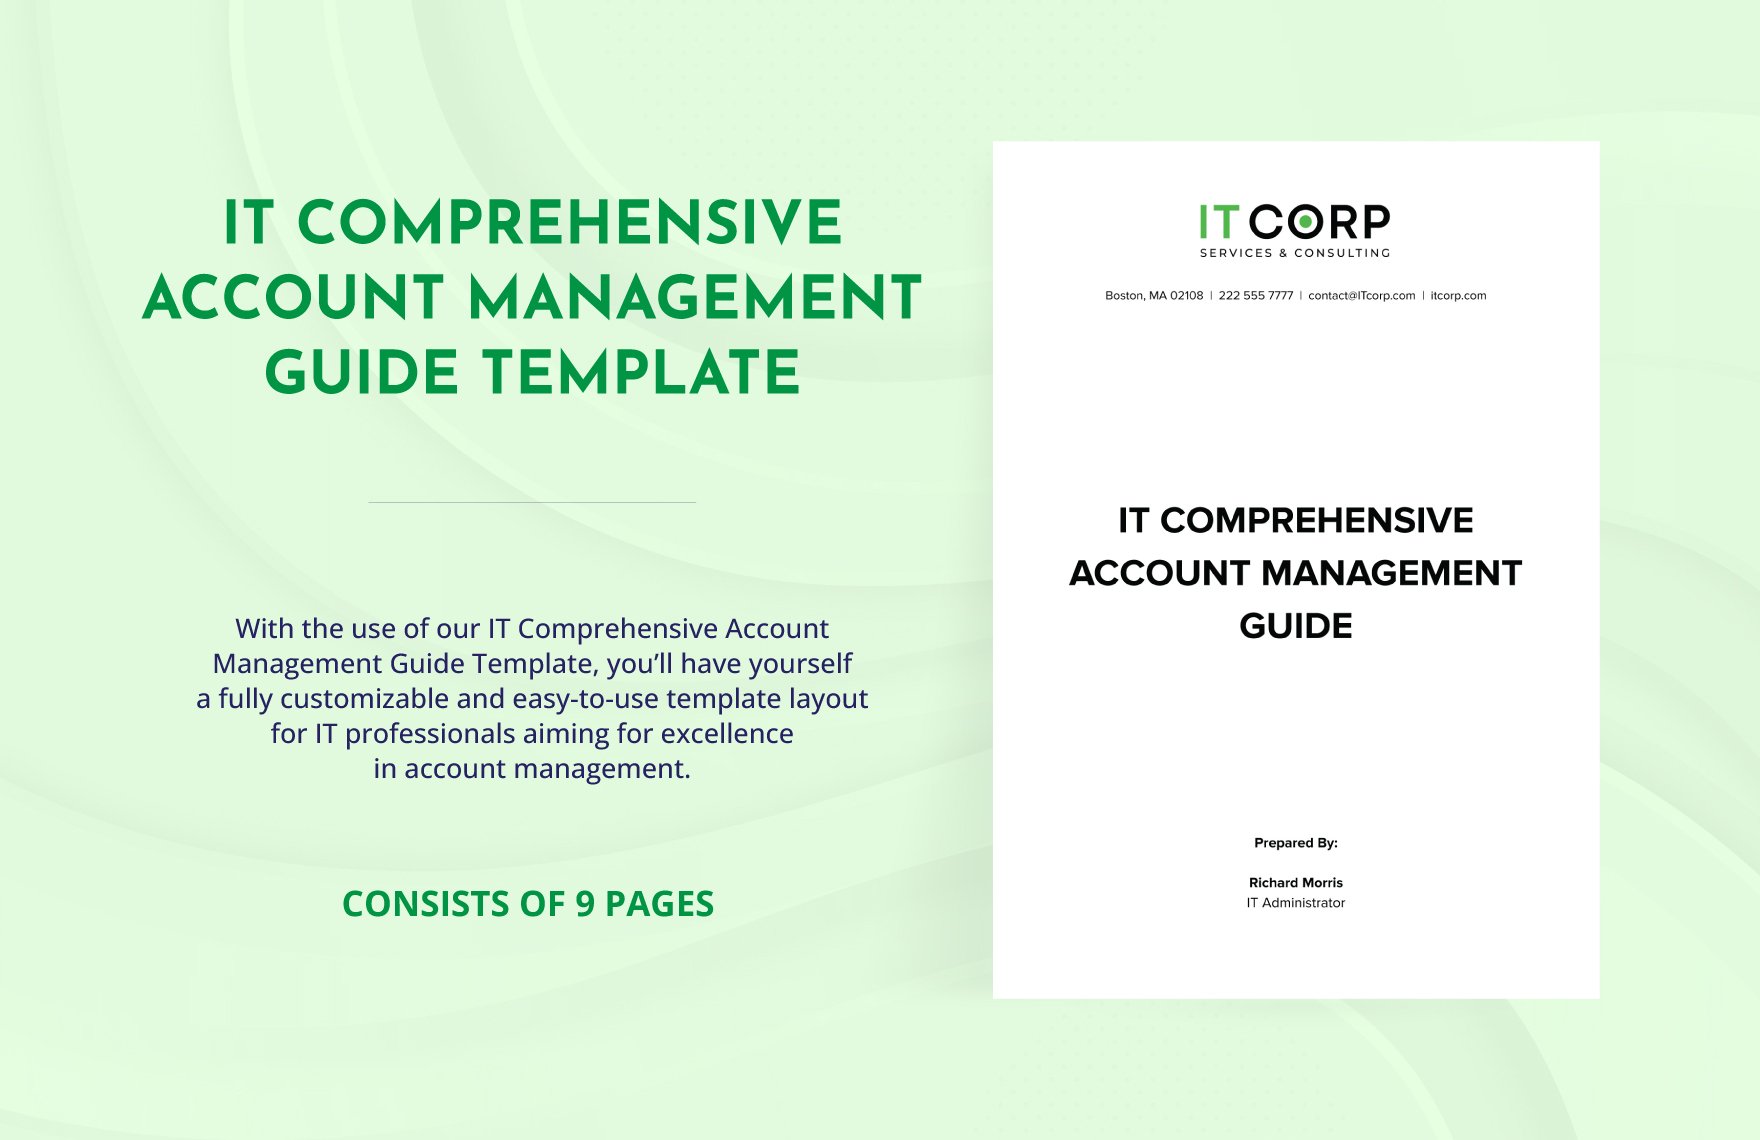 IT Comprehensive Account Management Guide Template